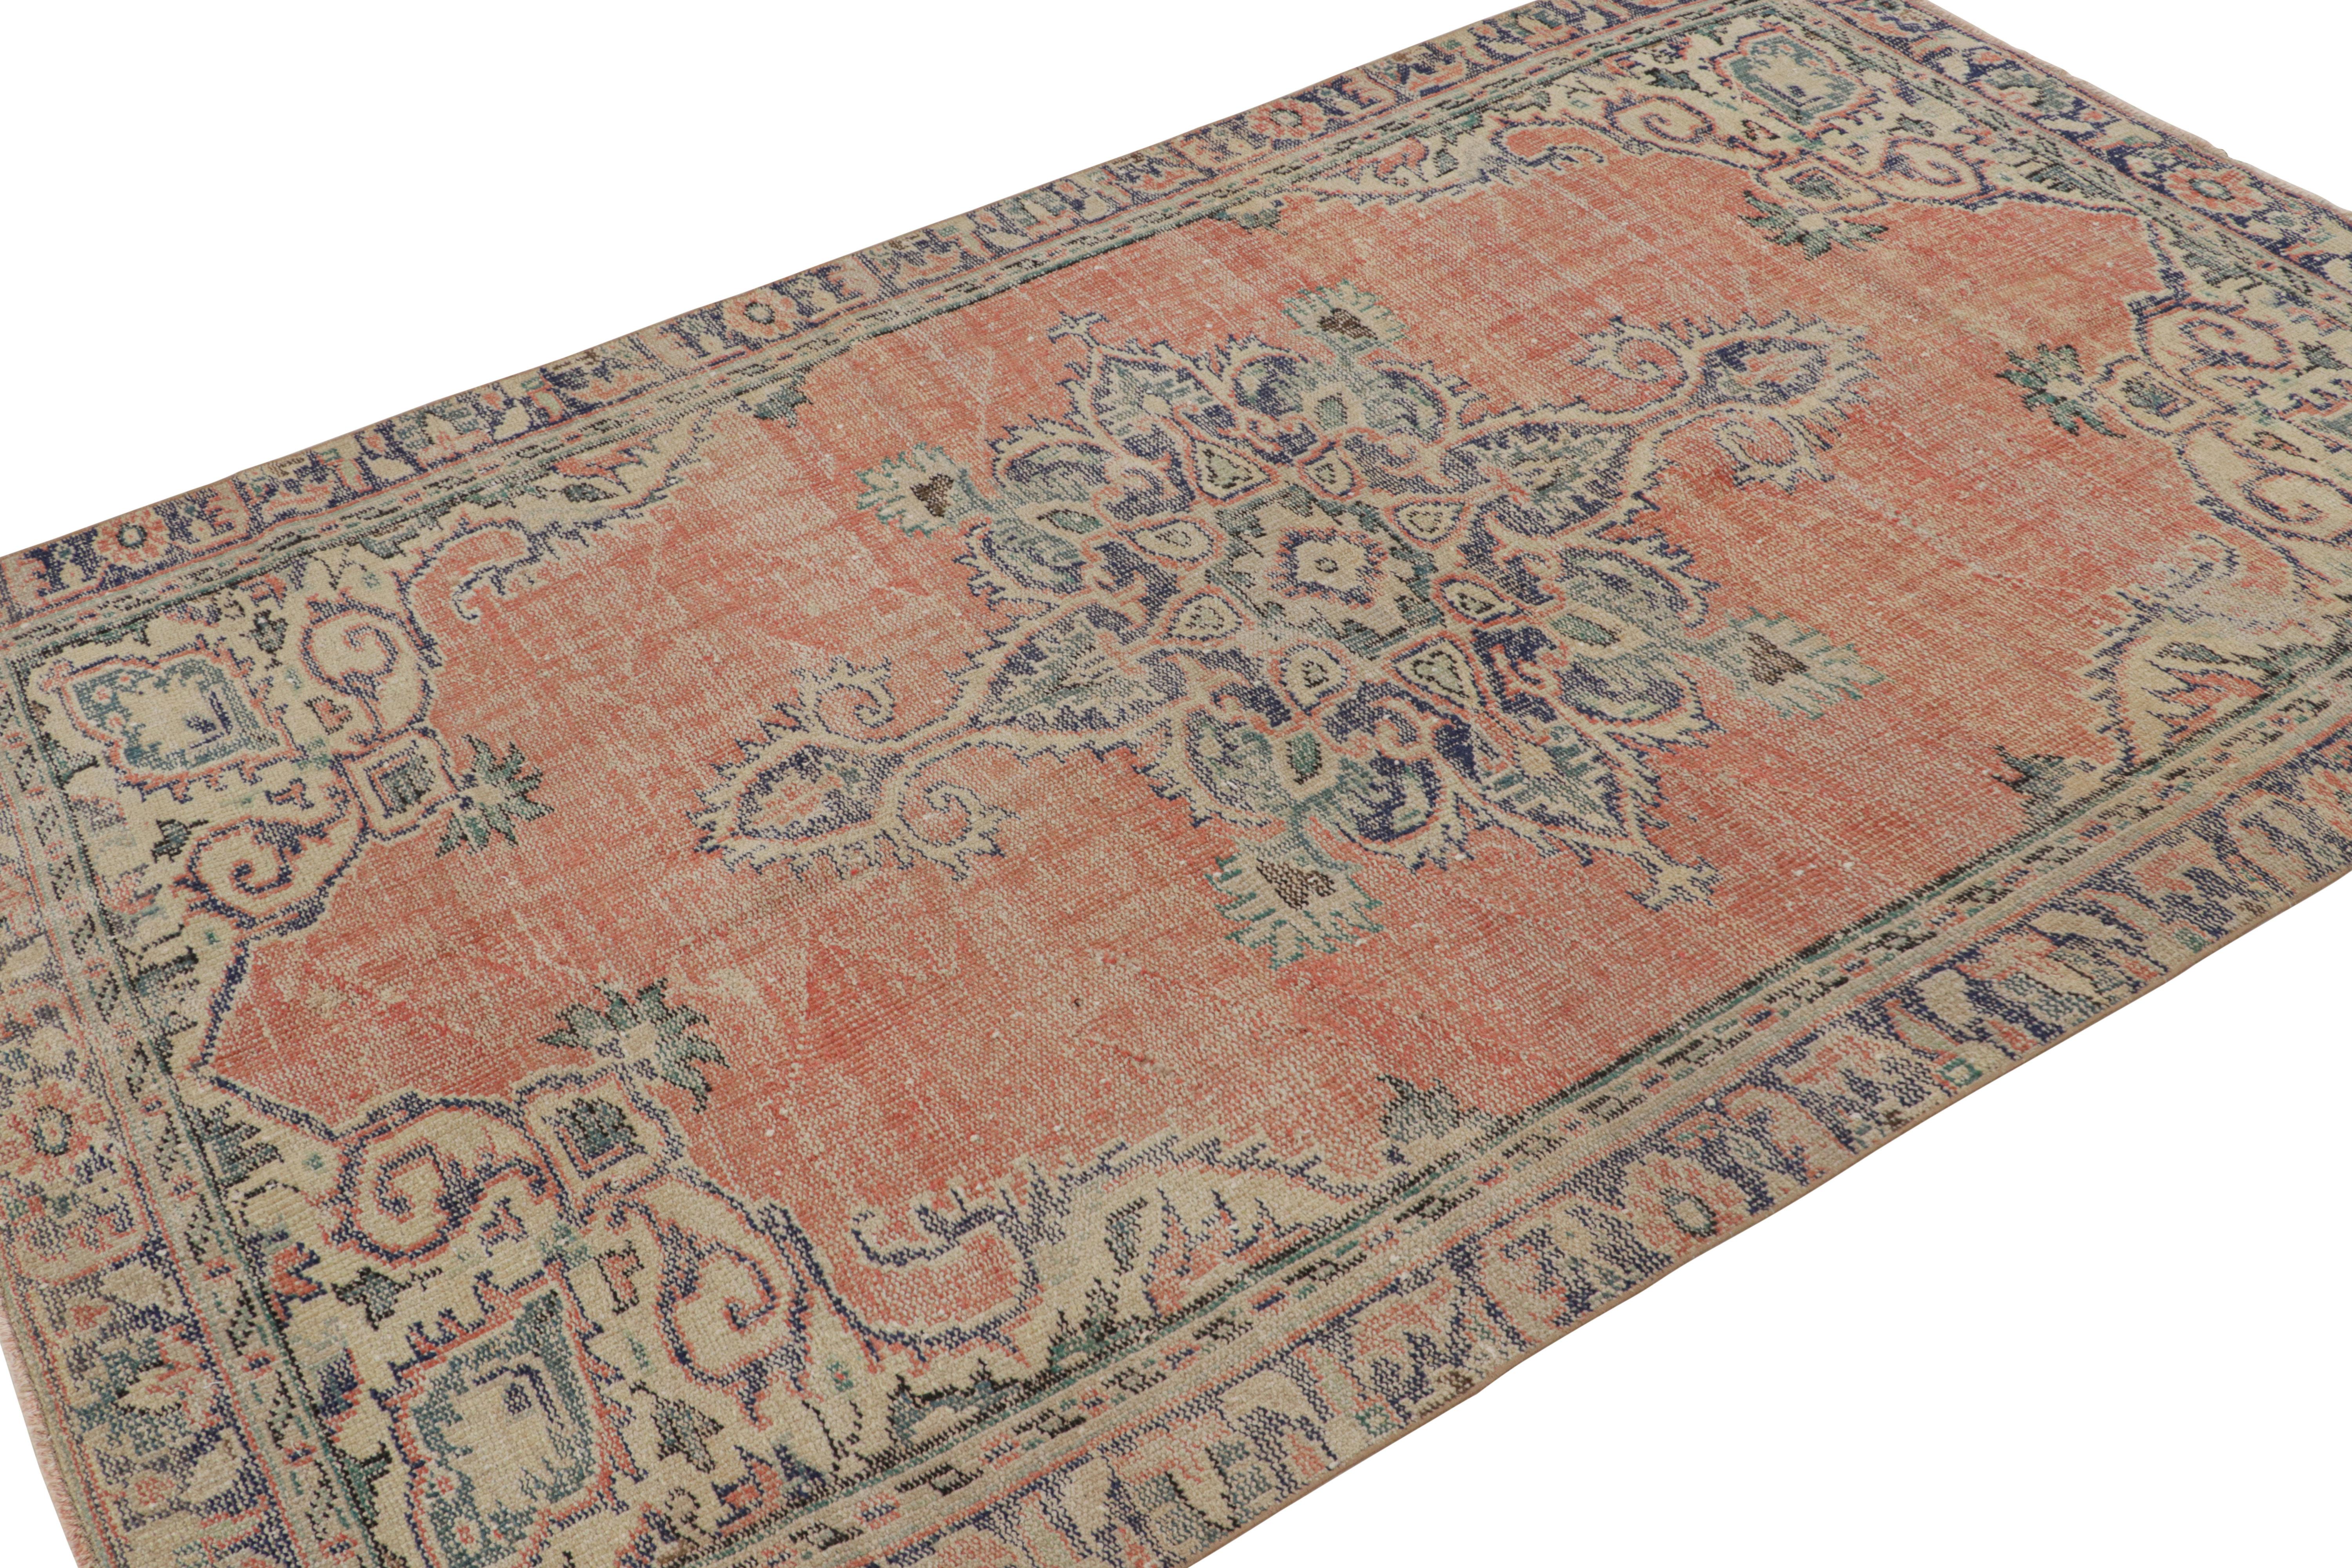 Handknotted in wool, this 5x8 vintage rug originates from Turkey, circa 1960-1970—possibly among the works of Zeki Müren. 

On the Design:

This vintage rug is inspired by traditional Oriental rugs, with a particular similarity to Persian rugs of